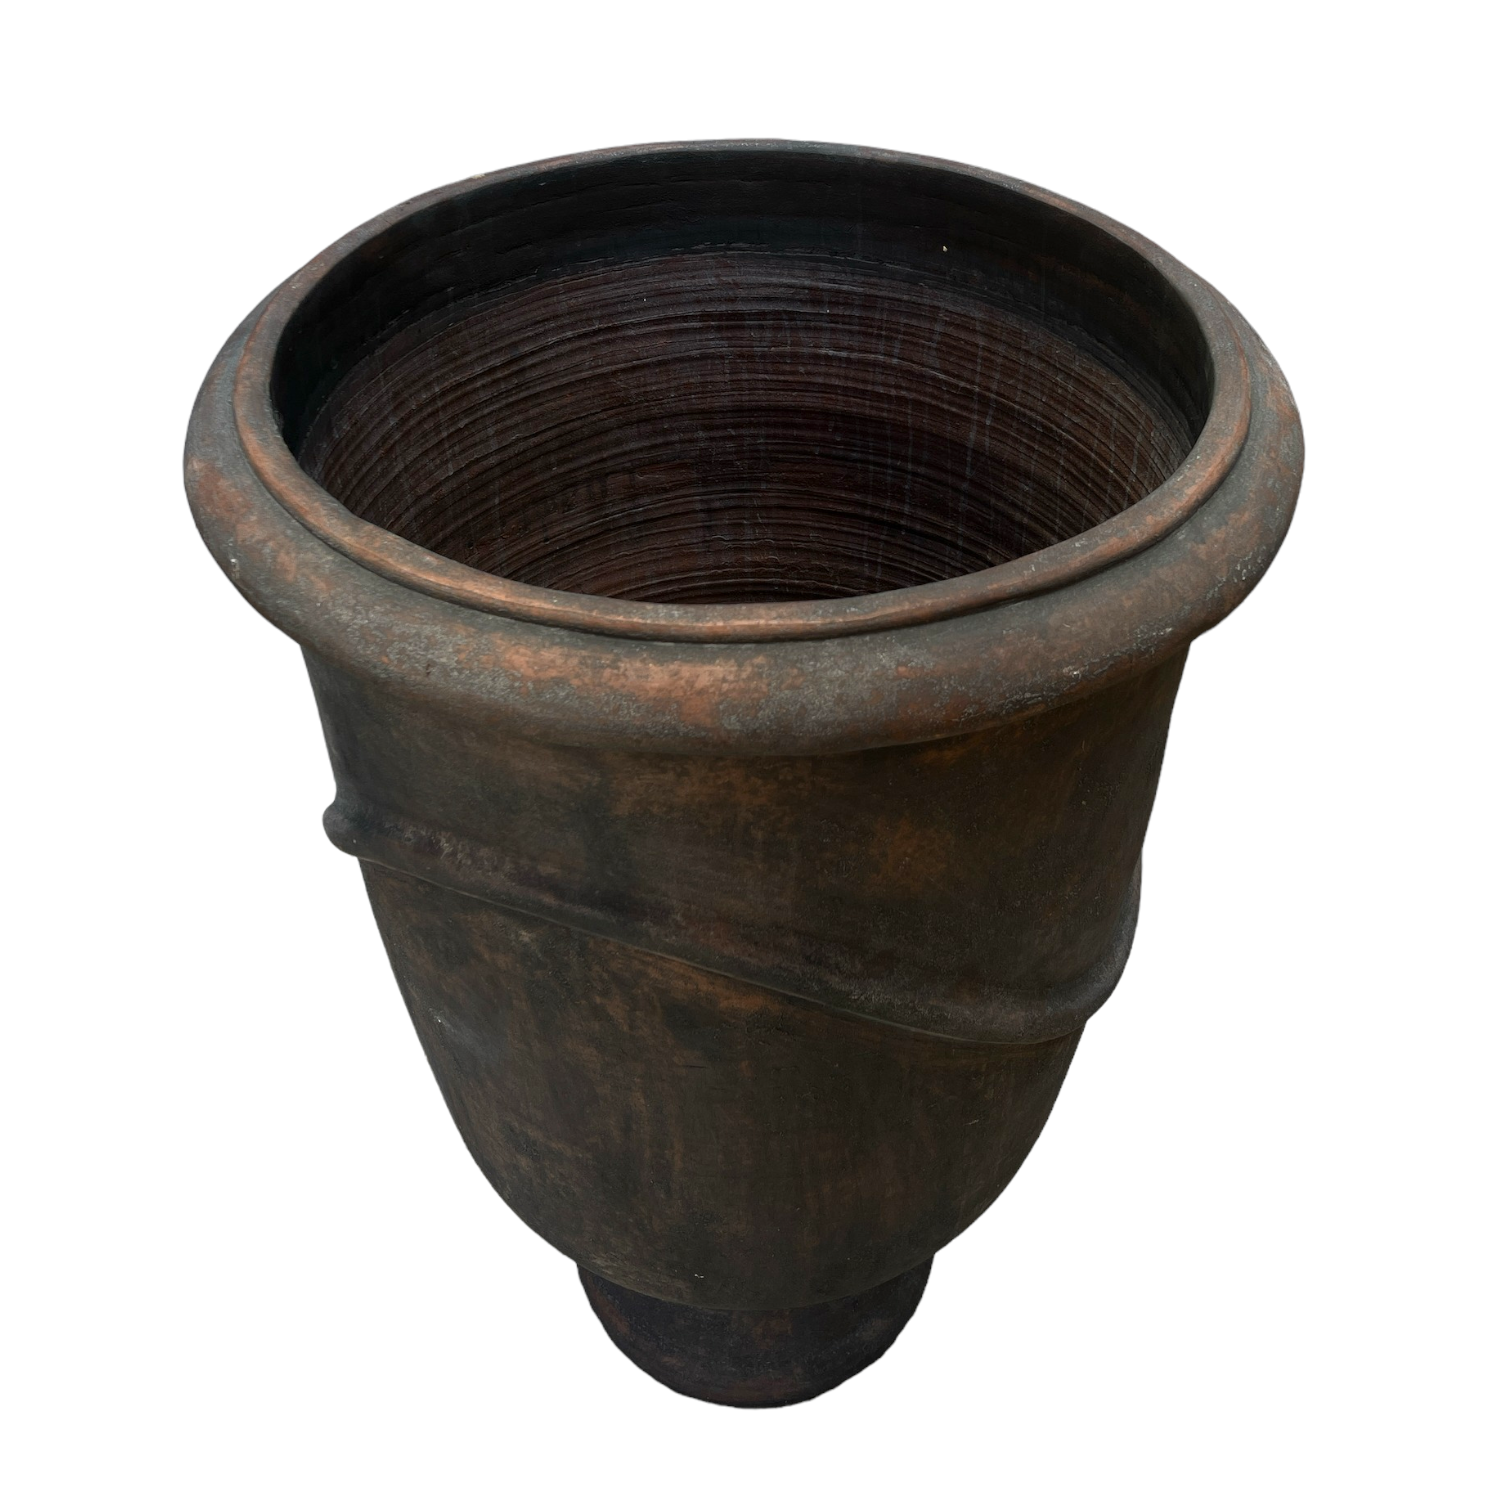 Indulge in the timeless design and rustic charm of this textured pot. Its classic shape and pared-back aesthetic give it a unique character that will enhance any space.